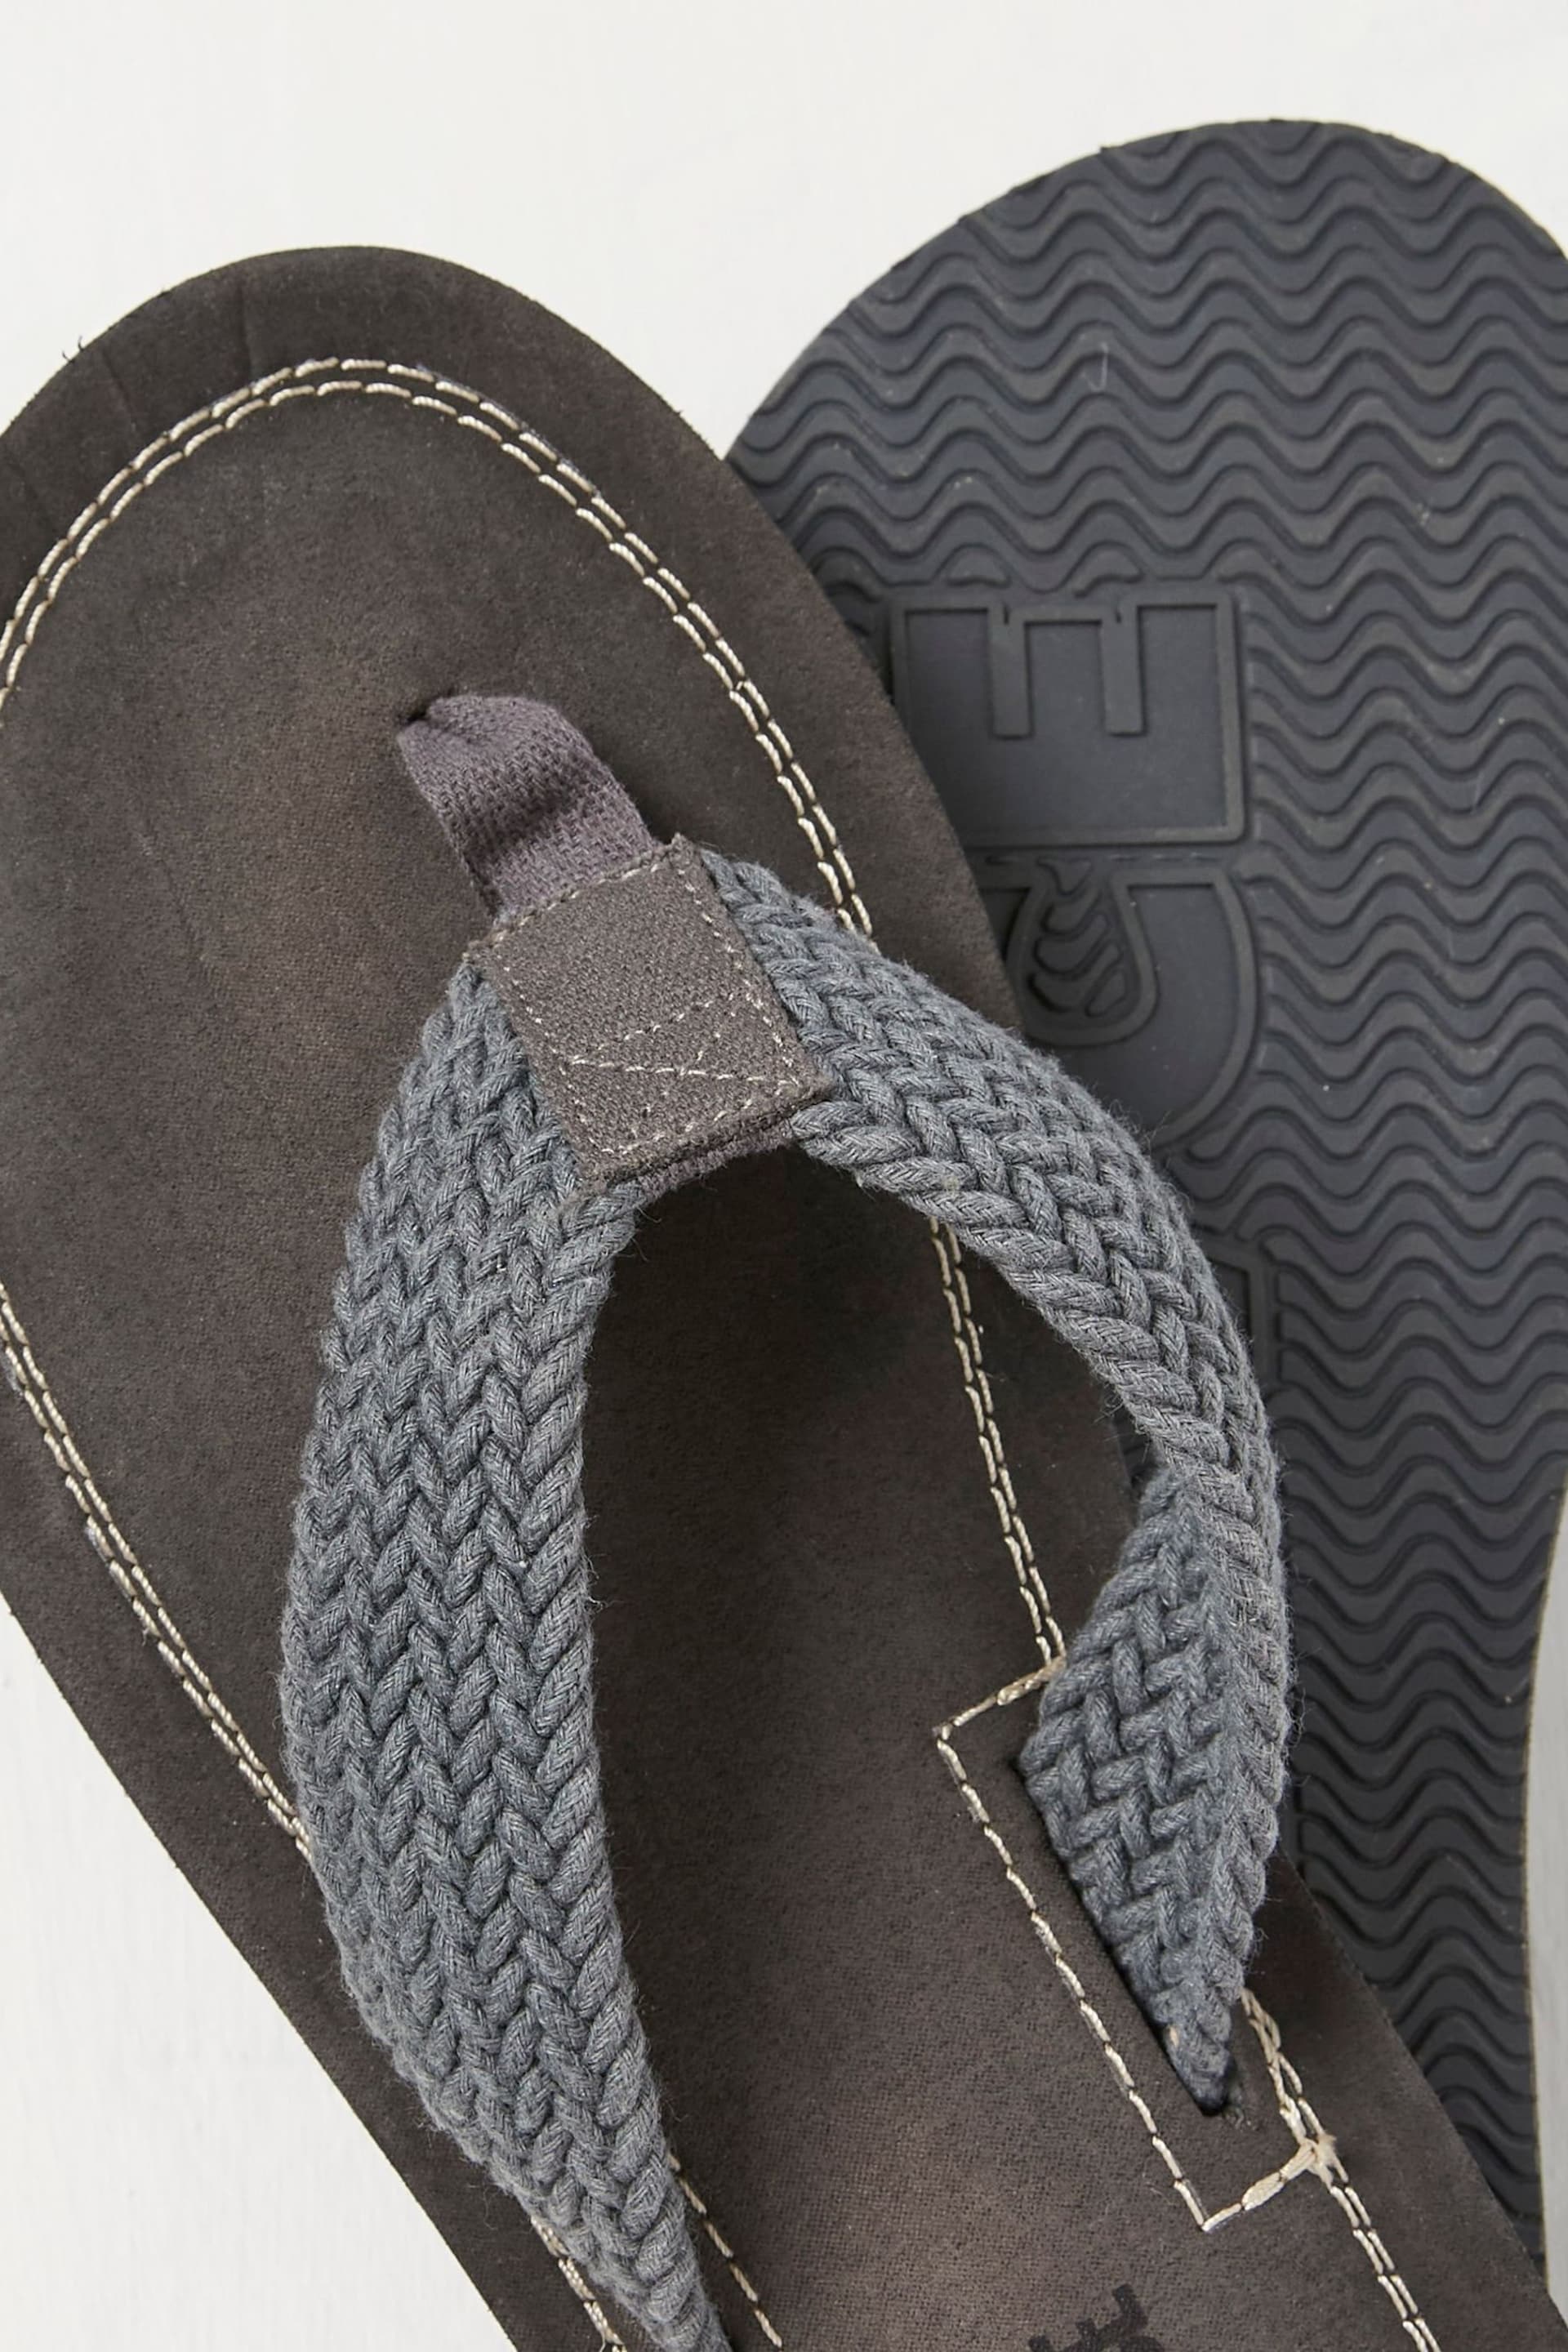 FatFace Grey Hayes Flip Flops - Image 3 of 3